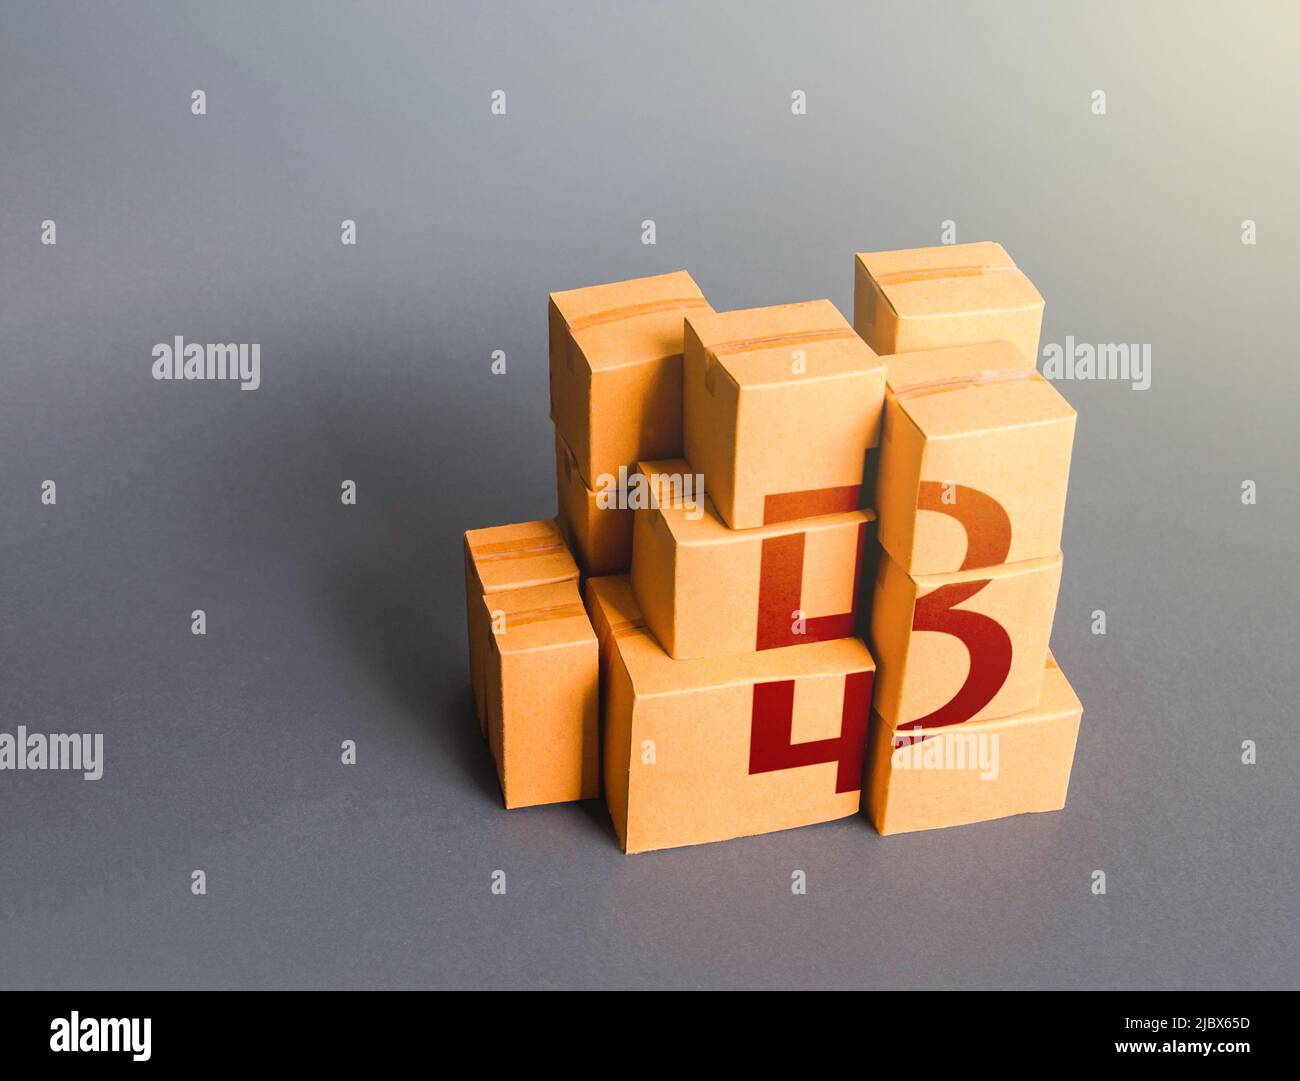 Boxes with thai baht symbol. Manufacturing industry and trade. Retail of products. Consumption economics, imports exports. Gross Domestic Product, GDP Stock Photo